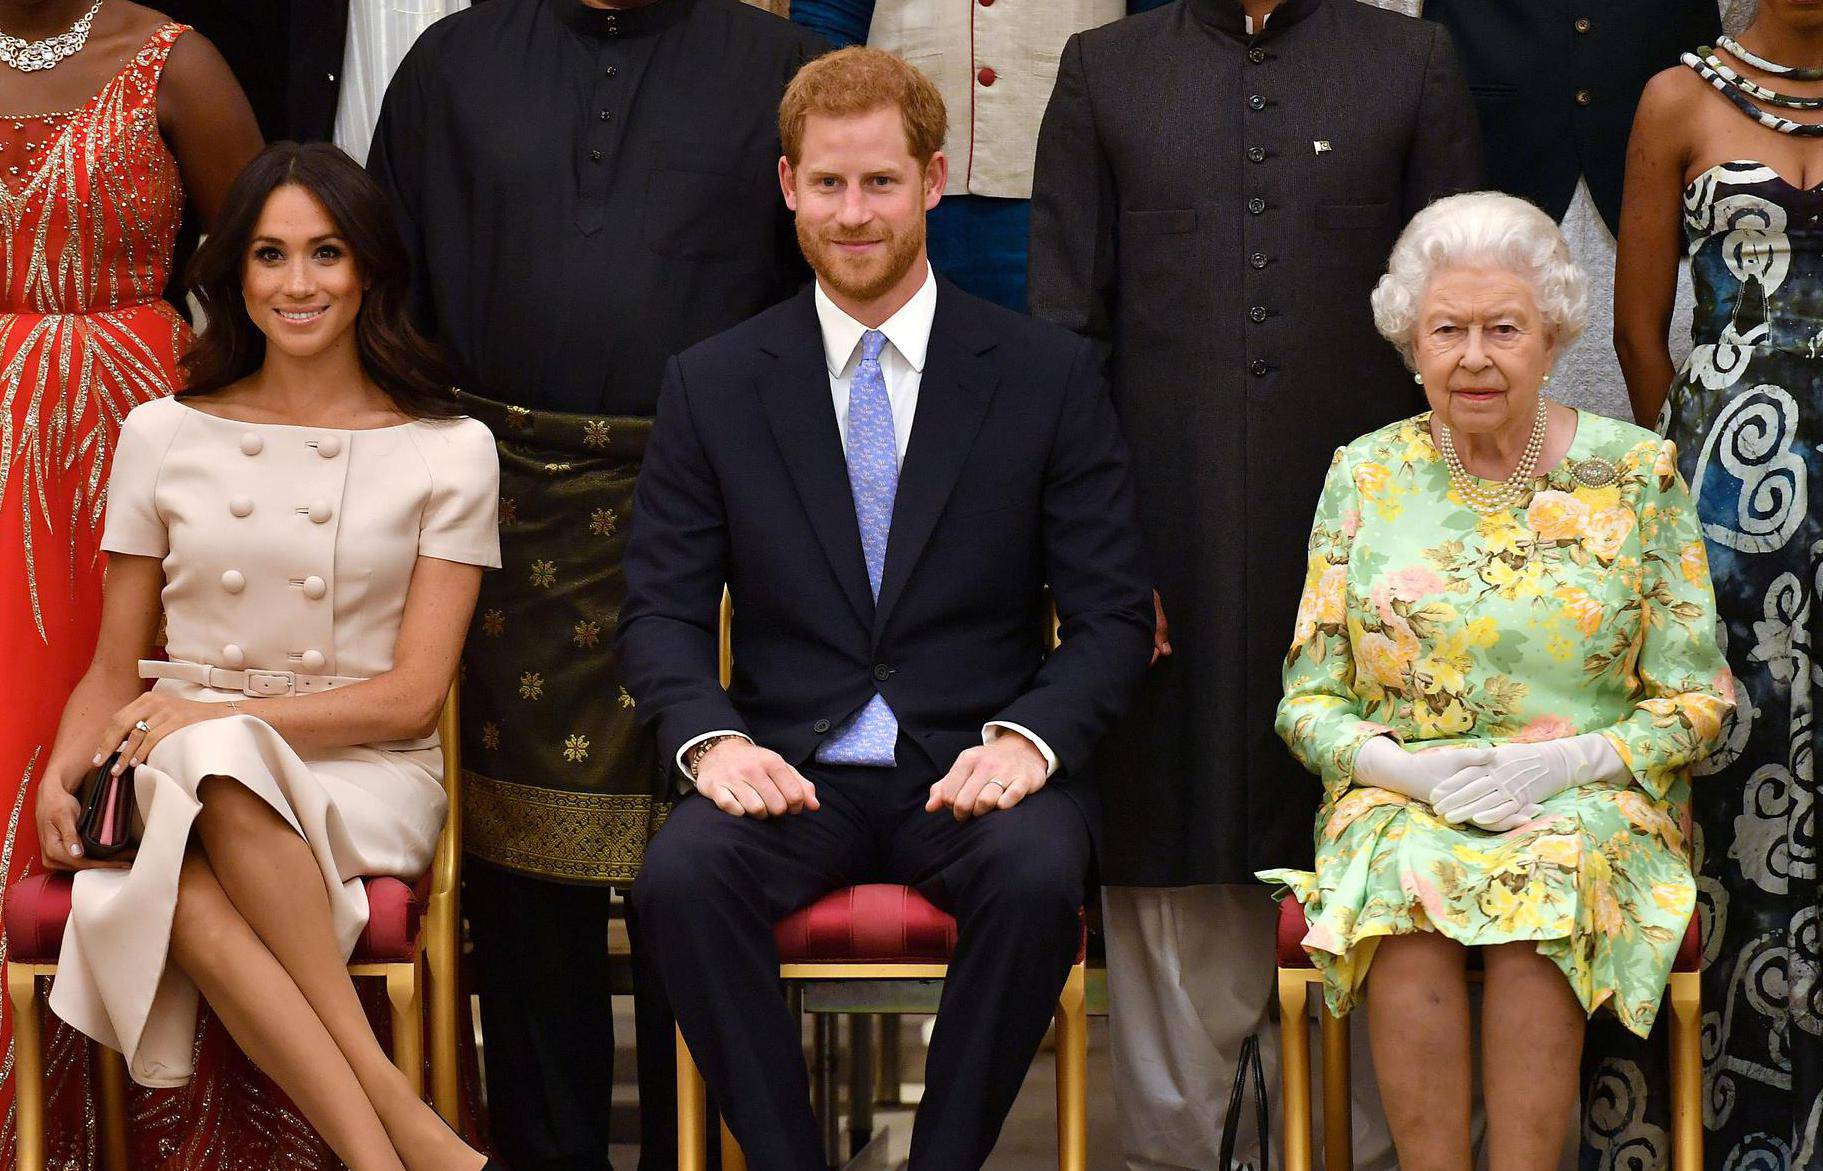 FILE PHOTO: Britain's Queen Elizabeth, Prince Harry and Meghan, the Duchess of Sussex pose for a picture with some of Queen's Young Leaders at a Buckingham Palace reception following the final Queen's Young Leaders Awards Ceremony, in London